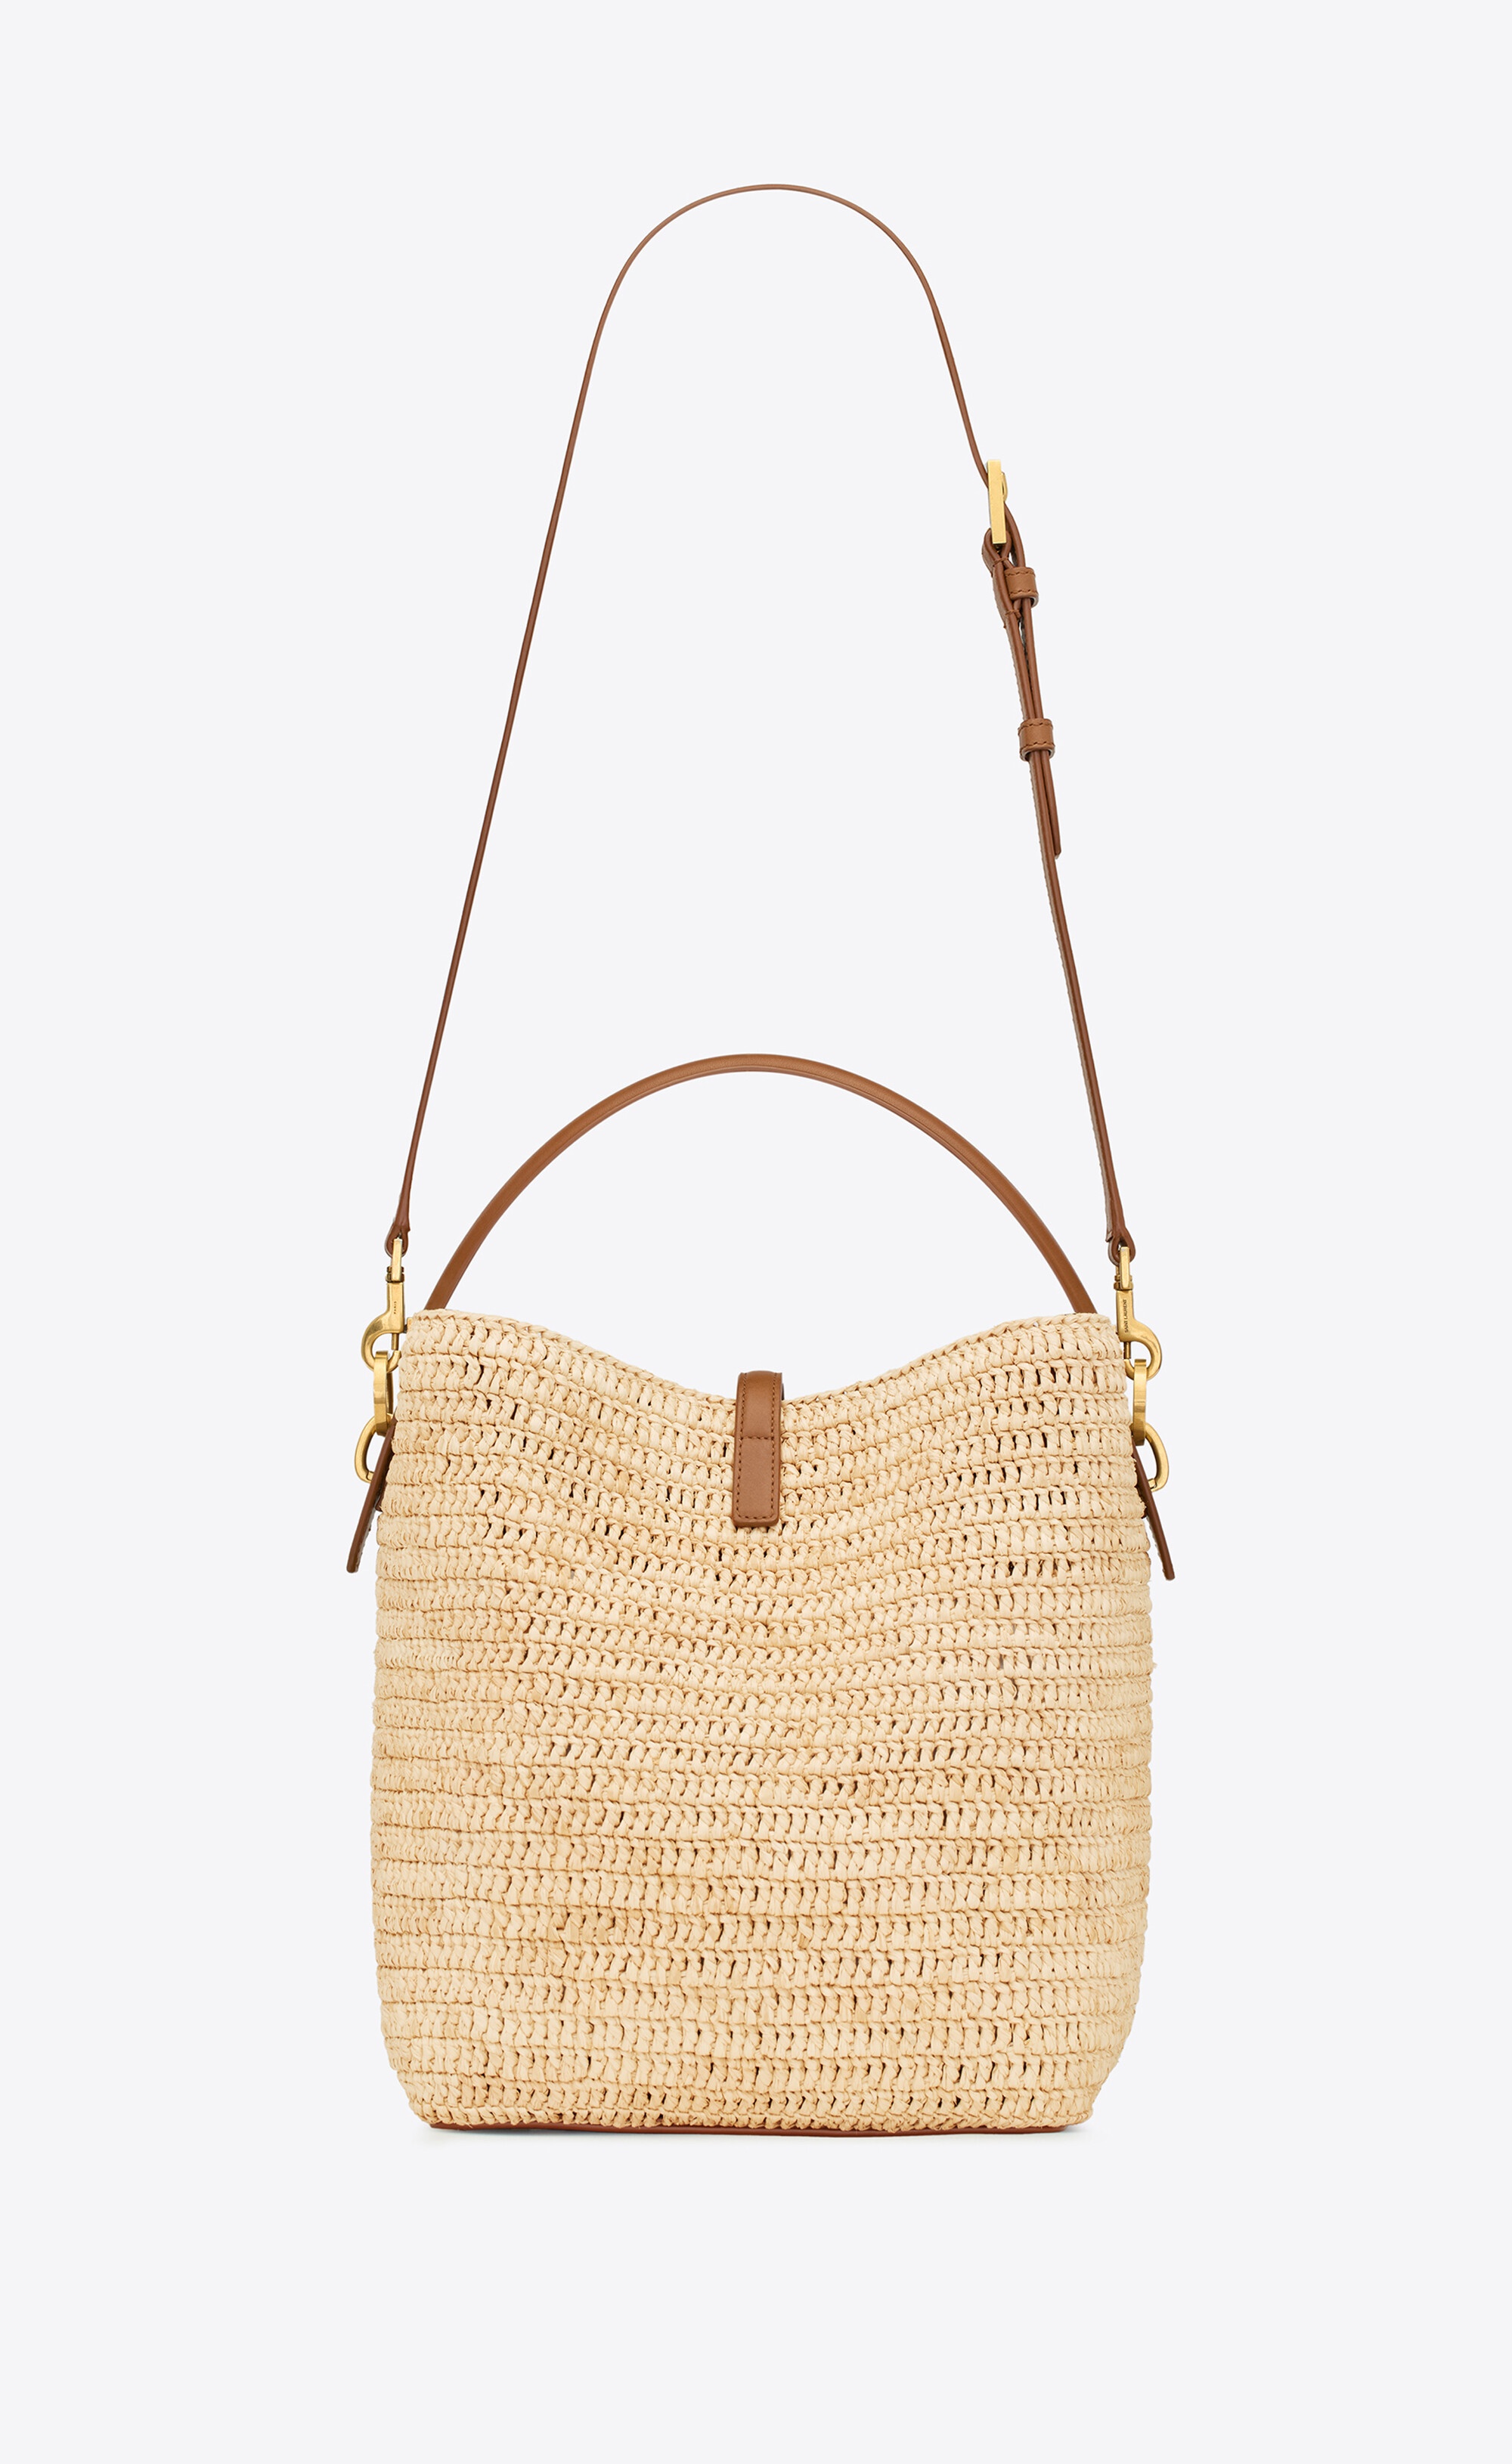 le 37 in woven raffia and vegetable-tanned leather - 5